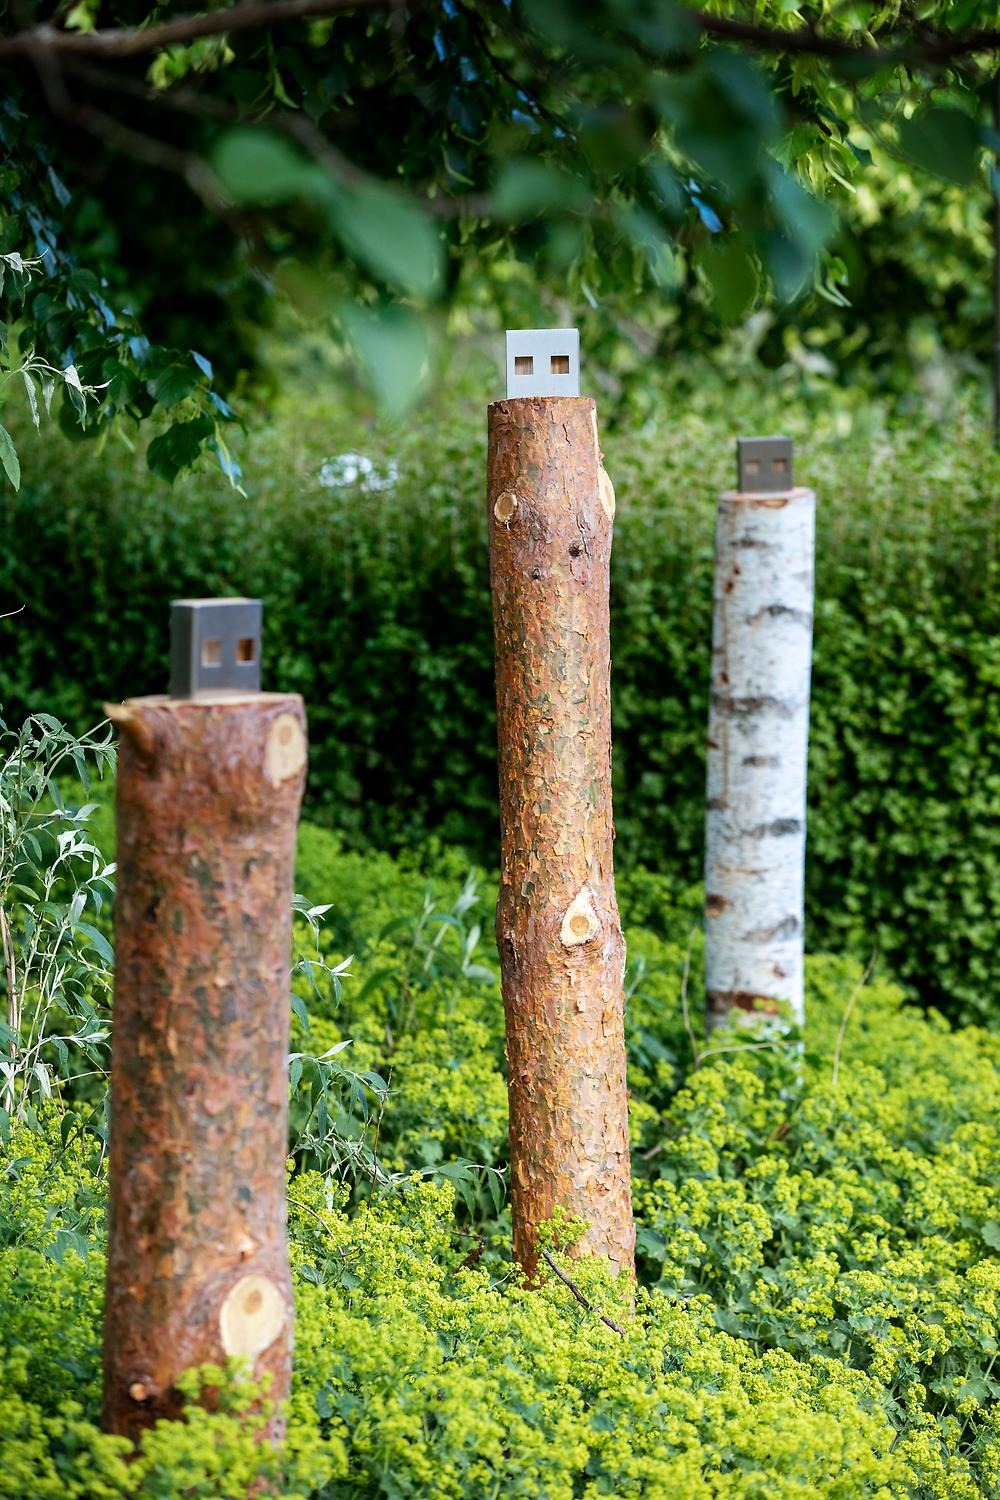 In a park area, three wooden logs stick up, at the top of the logs are metal objects that represent a USB stick that you insert into the computer.